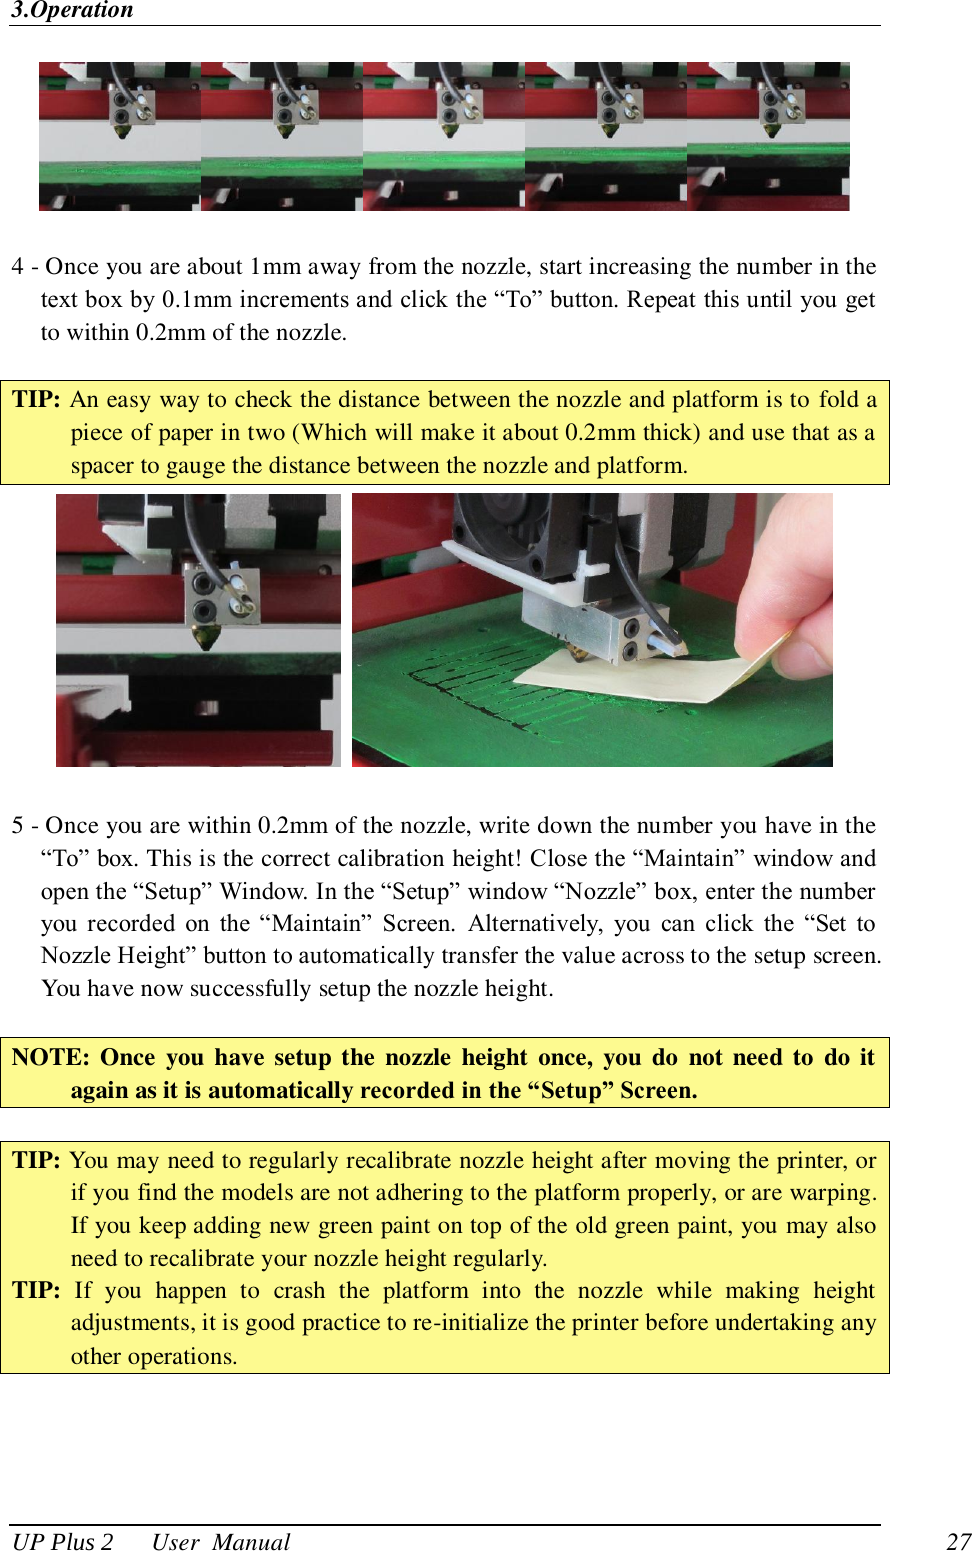 3.Operation UP Plus 2      User  Manual                                27   4 - Once you are about 1mm away from the nozzle, start increasing the number in the text box by 0.1mm increments and click the ―To‖ button. Repeat this until you get to within 0.2mm of the nozzle.    TIP: An easy way to check the distance between the nozzle and platform is to fold a piece of paper in two (Which will make it about 0.2mm thick) and use that as a spacer to gauge the distance between the nozzle and platform.     5 - Once you are within 0.2mm of the nozzle, write down the number you have in the ―To‖ box. This is the correct calibration height! Close the ―Maintain‖ window and open the ―Setup‖ Window. In the ―Setup‖ window ―Nozzle‖ box, enter the number you  recorded  on  the  ―Maintain‖  Screen.  Alternatively,  you  can  click  the  ―Set  to Nozzle Height‖ button to automatically transfer the value across to the setup screen. You have now successfully setup the nozzle height.  NOTE: Once  you have setup the  nozzle  height once,  you do  not  need to  do it again as it is automatically recorded in the “Setup” Screen.  TIP: You may need to regularly recalibrate nozzle height after moving the printer, or if you find the models are not adhering to the platform properly, or are warping. If you keep adding new green paint on top of the old green paint, you may also need to recalibrate your nozzle height regularly. TIP:  If  you  happen  to  crash  the  platform  into  the  nozzle  while  making  height adjustments, it is good practice to re-initialize the printer before undertaking any other operations.  